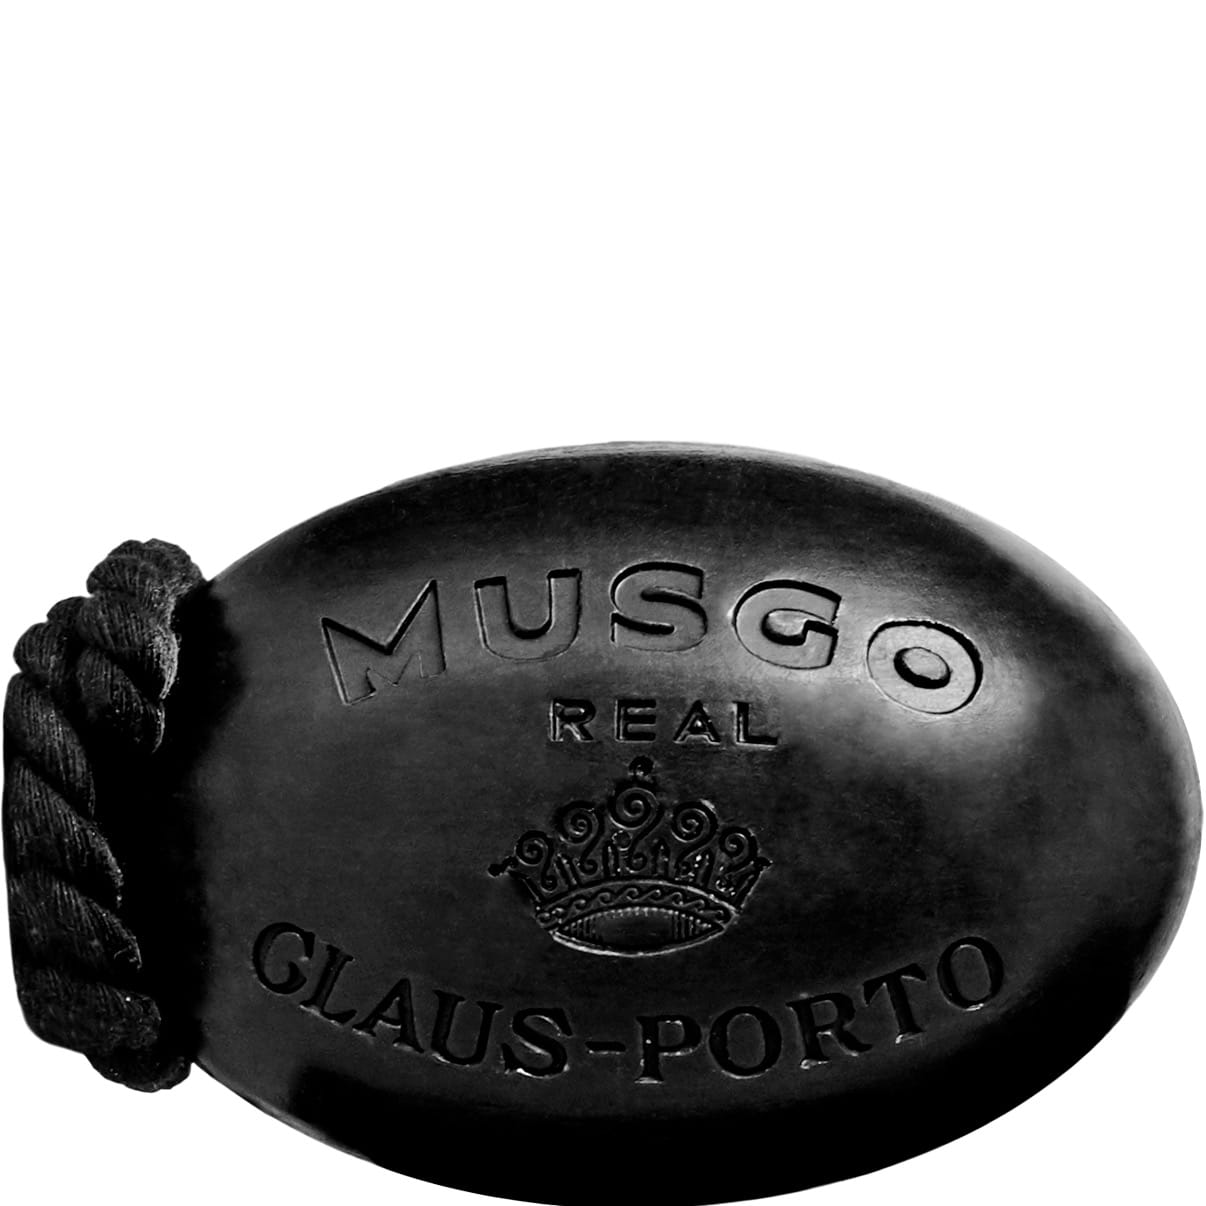 Musgo Real Soap on a Rope Black Edition 190gr - 1.2 - MR-199CC009